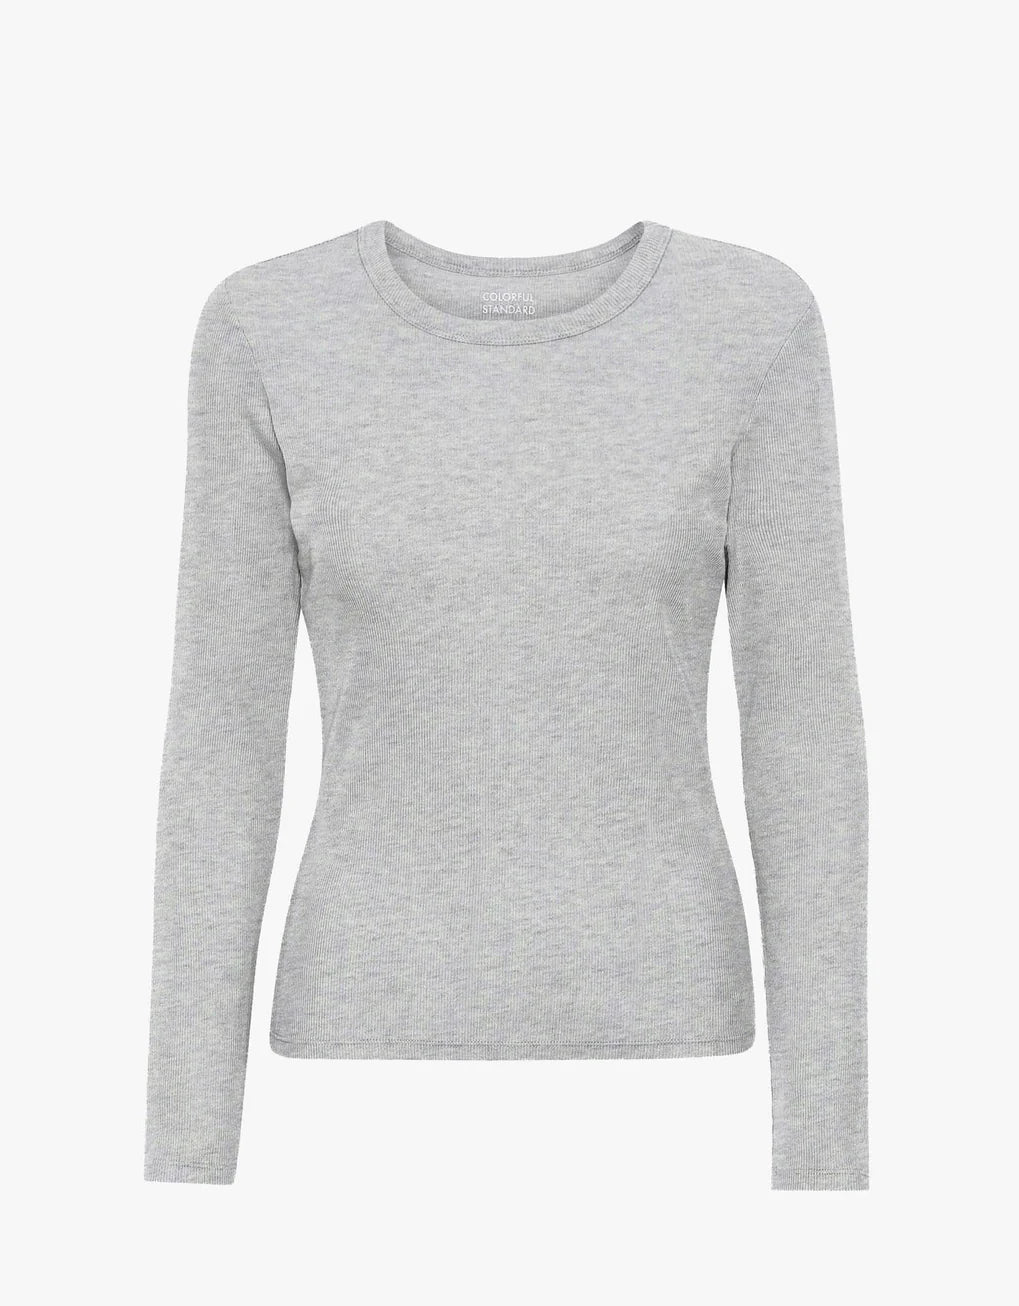 This women's grey long-sleeved sweater is made of Colorful Standard's Organic Rib LS T-Shirt for a comfortable fit.